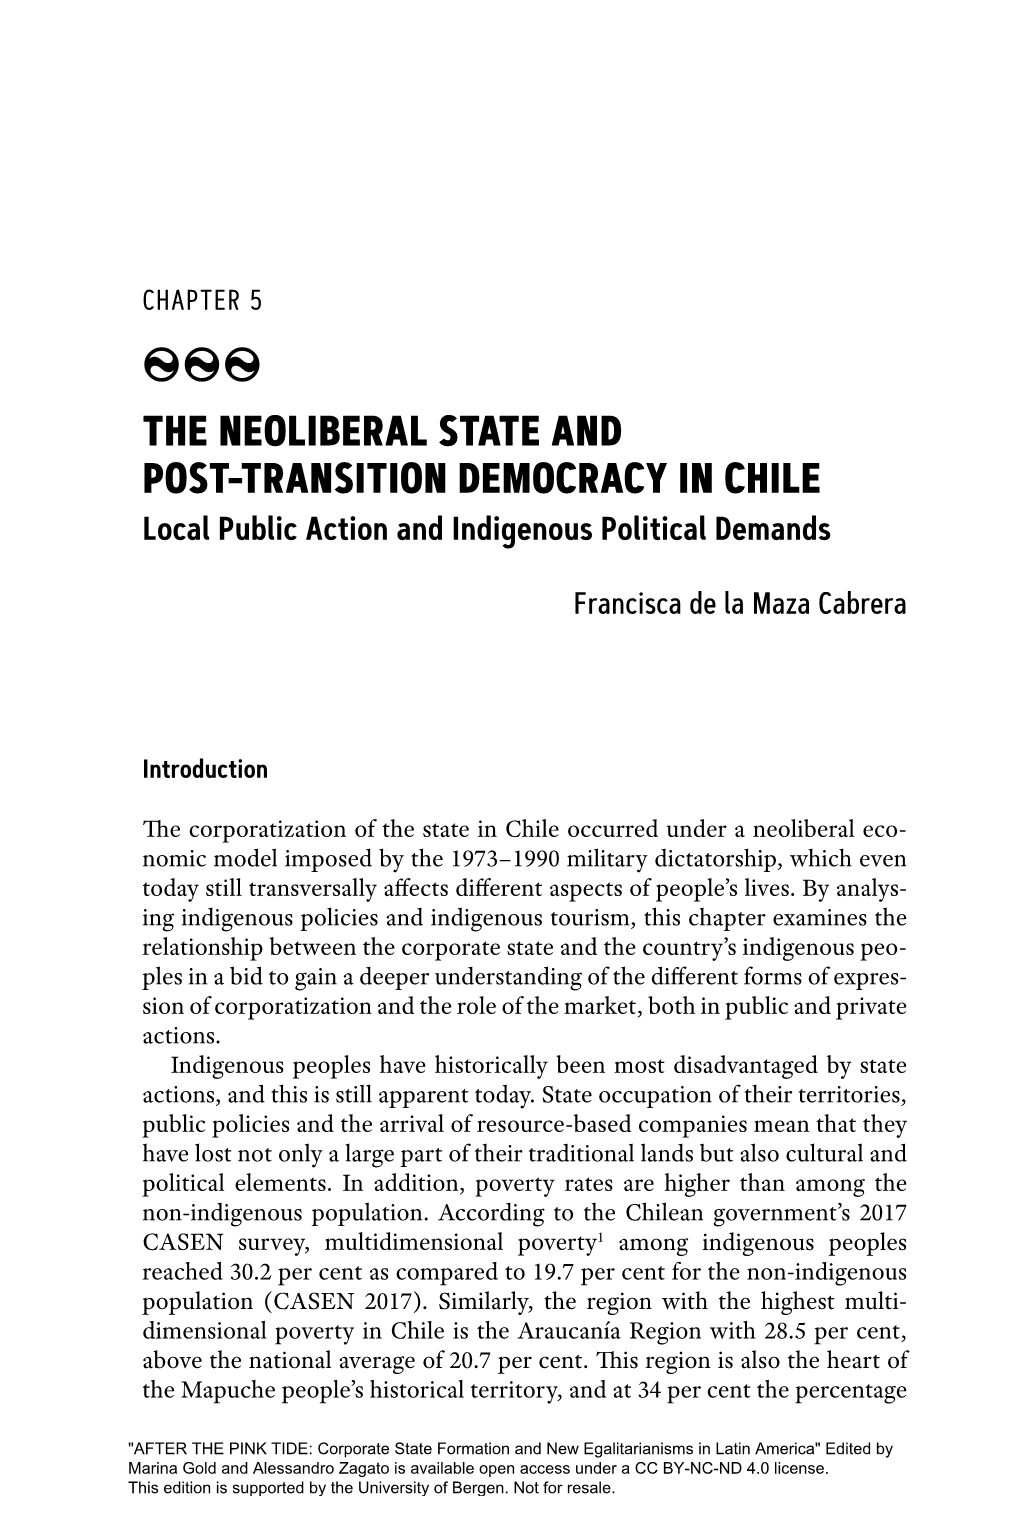 Chapter 5. the Neoliberal State and Post-Transition Democracy in Chile